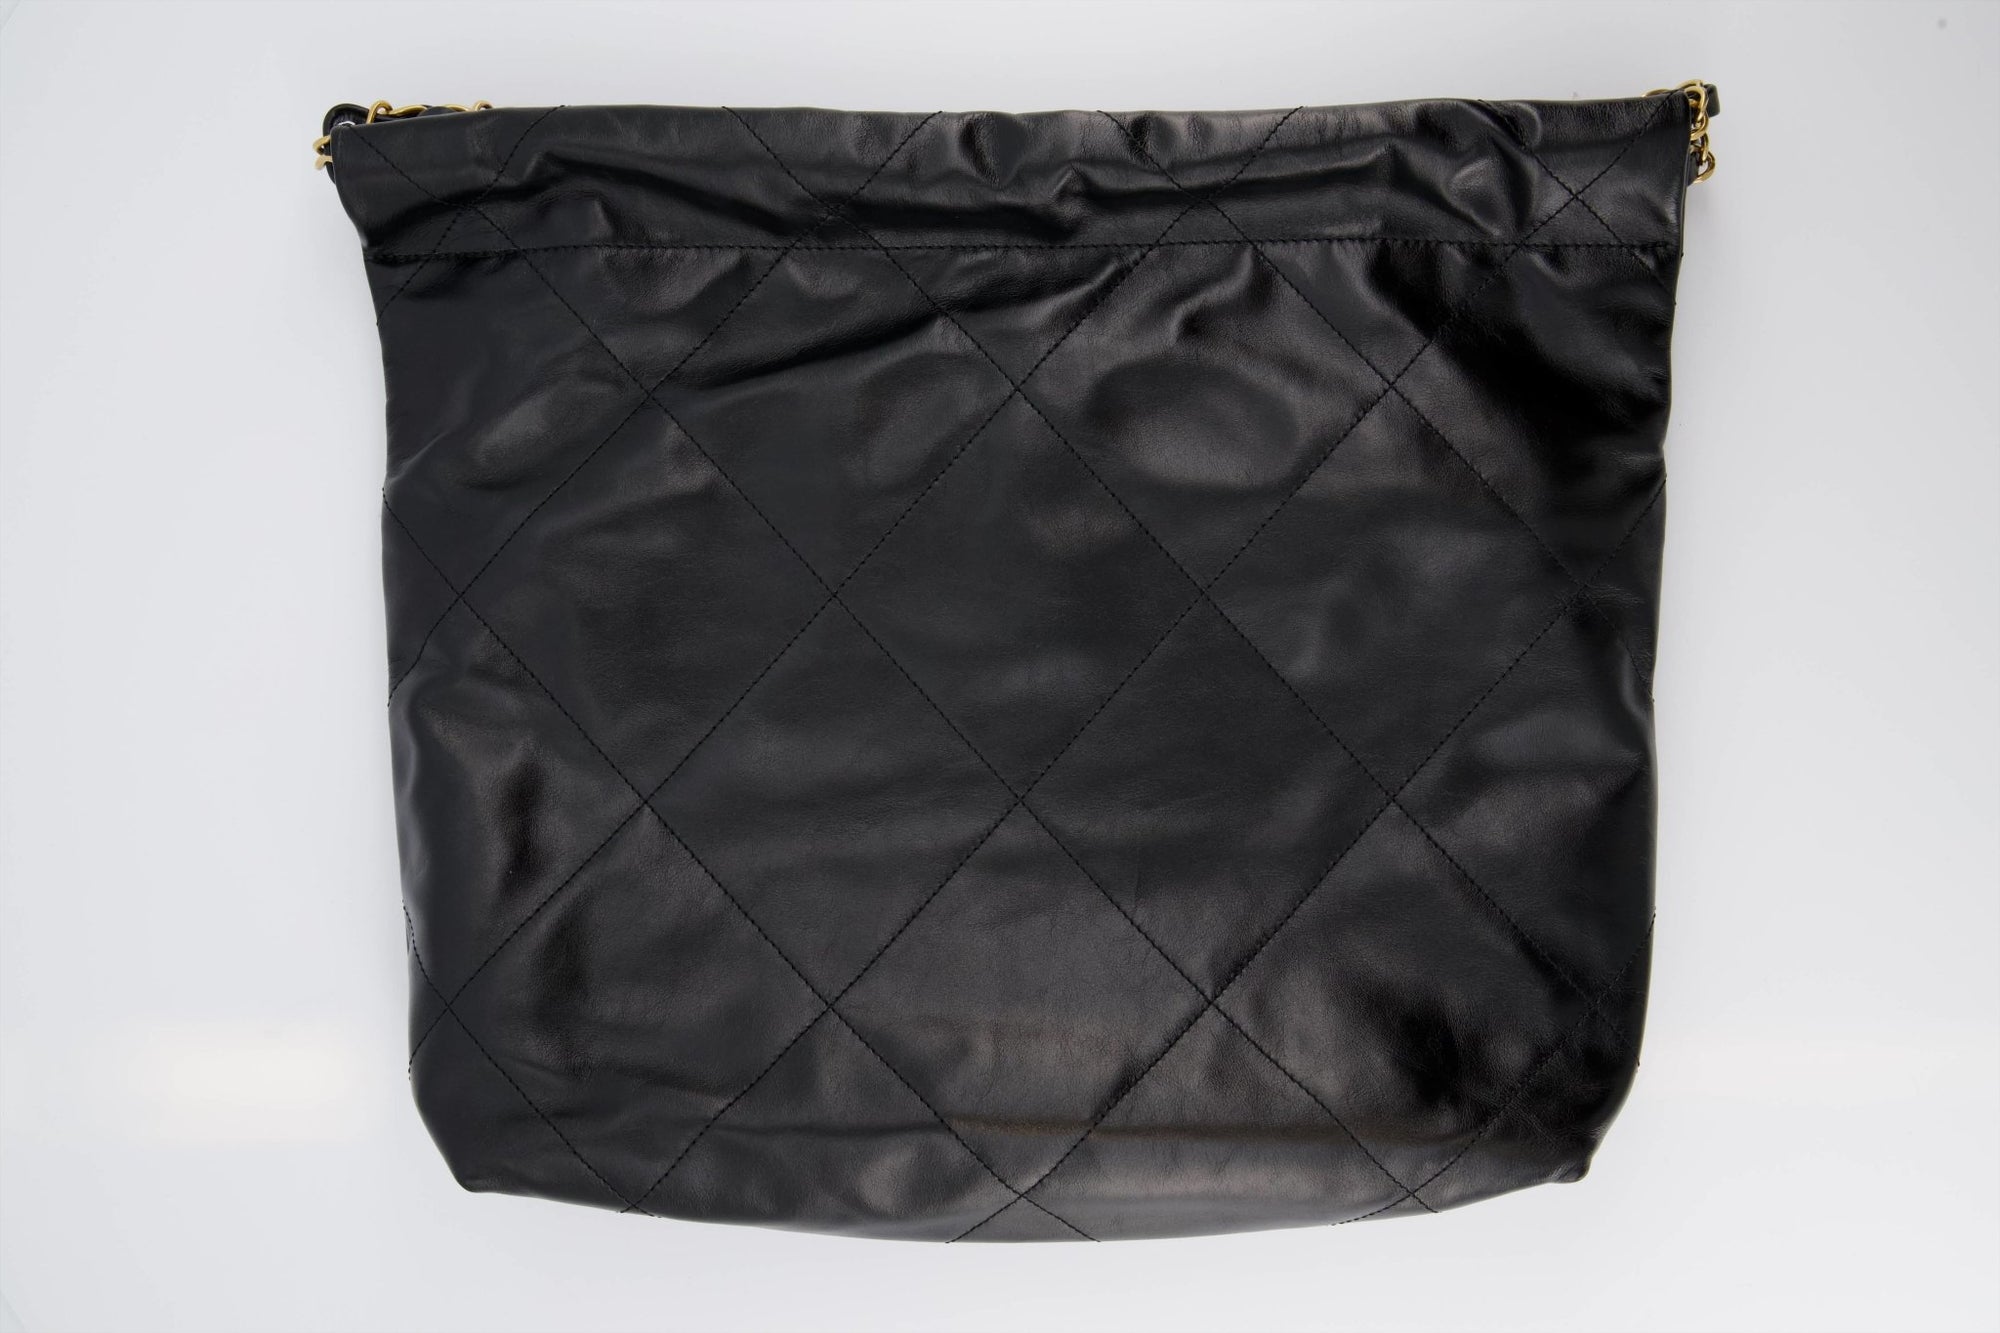 Vintage CHANEL Black Quilted Caviar Leather Hobo Bucket -  UK